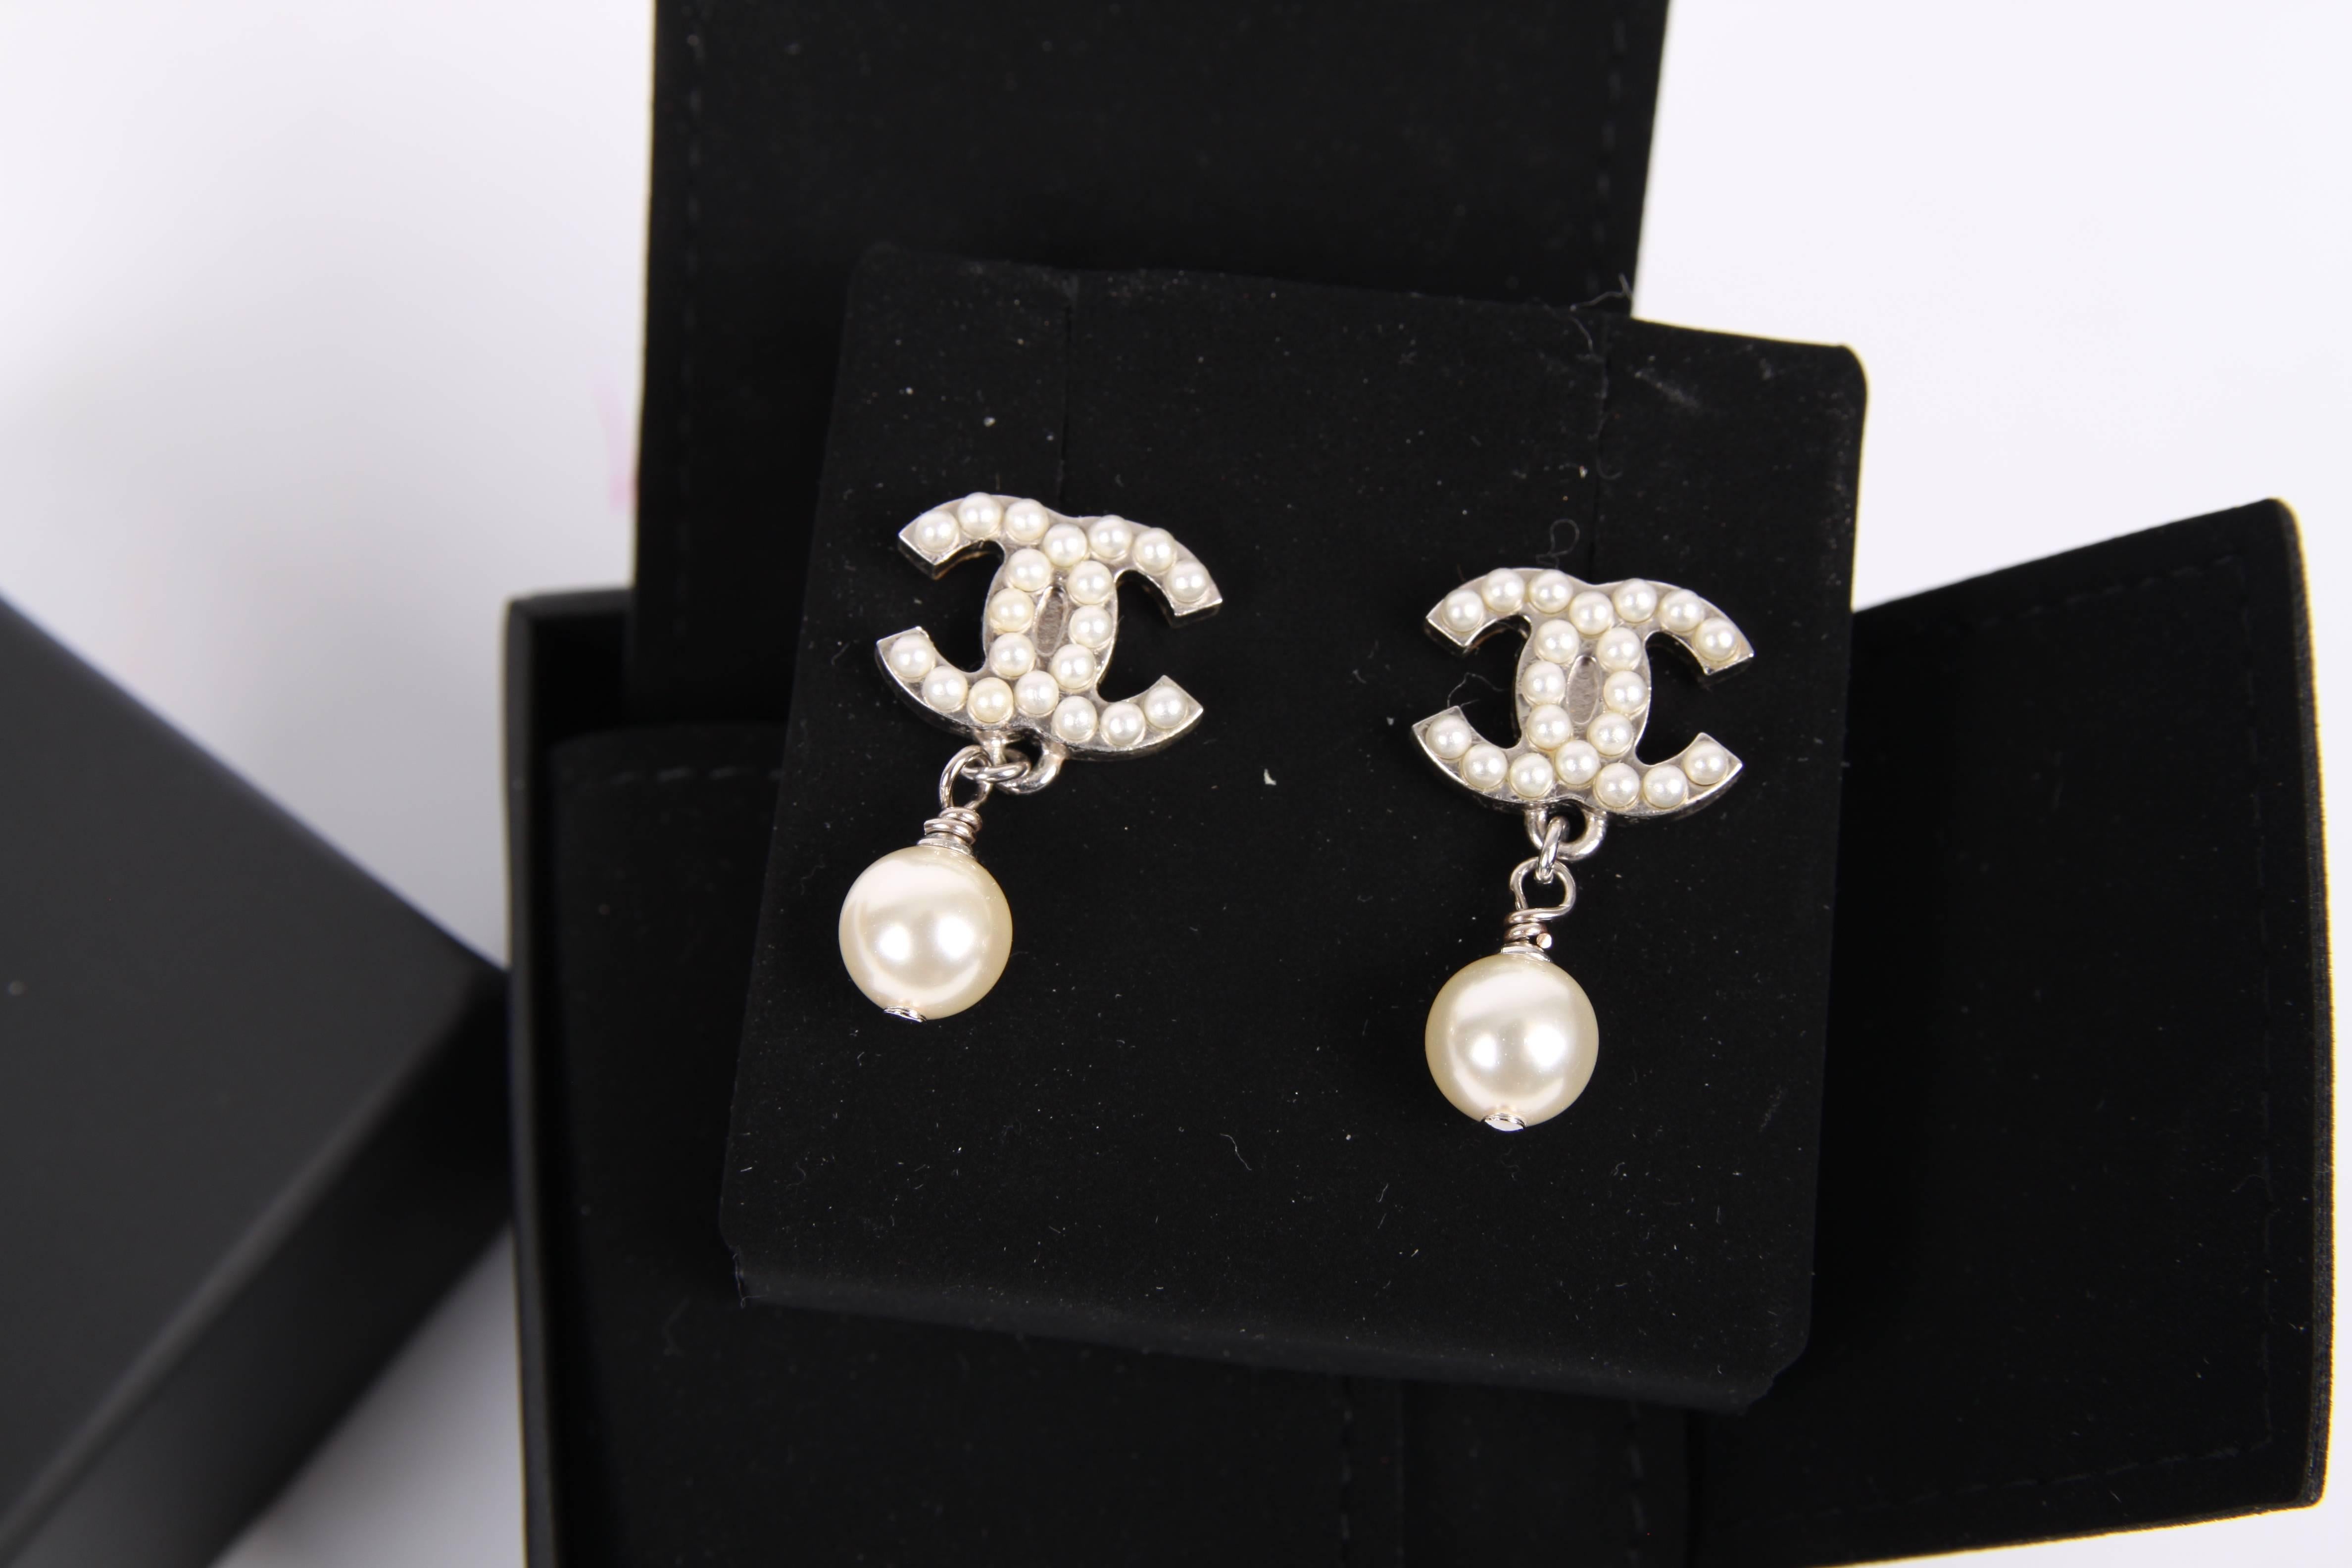 Elegant earrings by Chanel, these are classic!

A silver-tone CC logo covered with mini pearls, underneath a larger faux pearl is dangling. This pair goes with everything, is brand new and never been worn. Comes with luxurious little Chanel